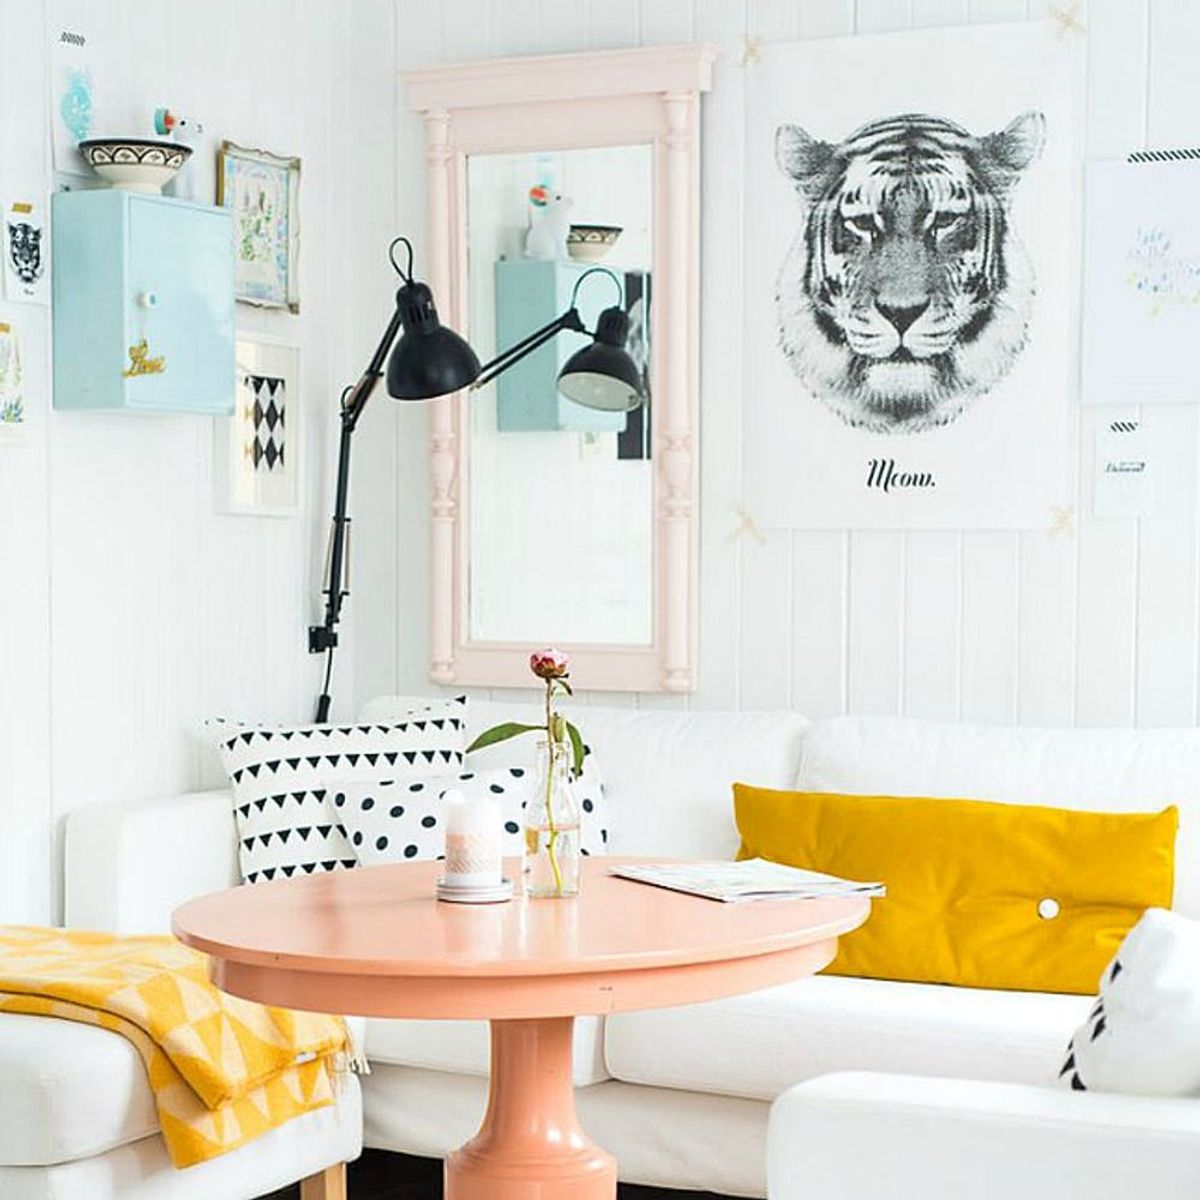 12 Pastel Decorating Tips Perfect for Spring